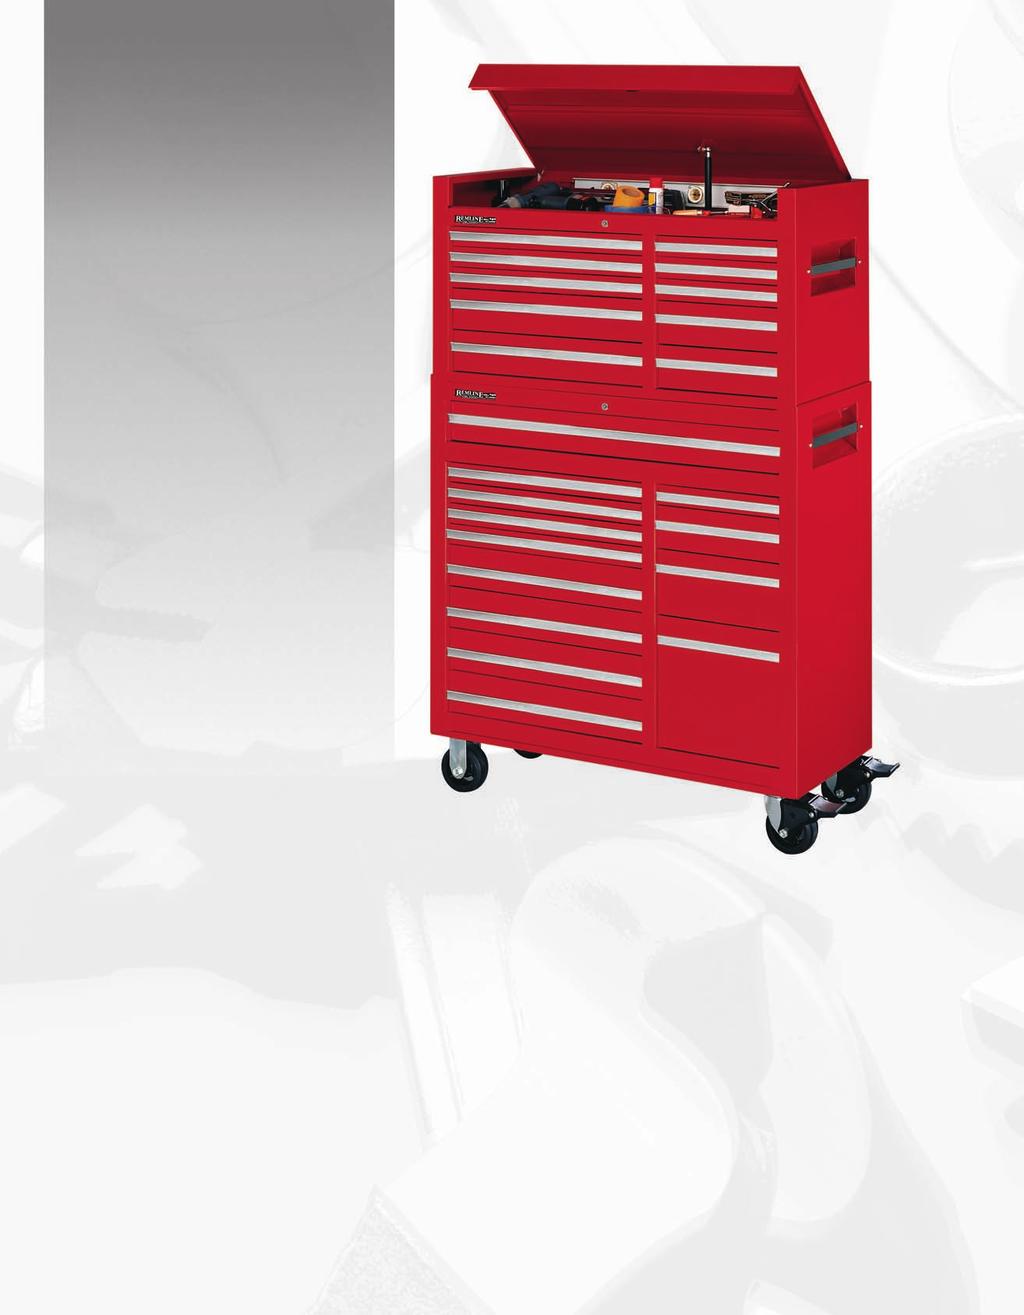 XQL 41" Chest and Cabinet 41" x 18" Chest/Cabinet Features Include: All steel construction with steel double walls for more strength and greater durability.